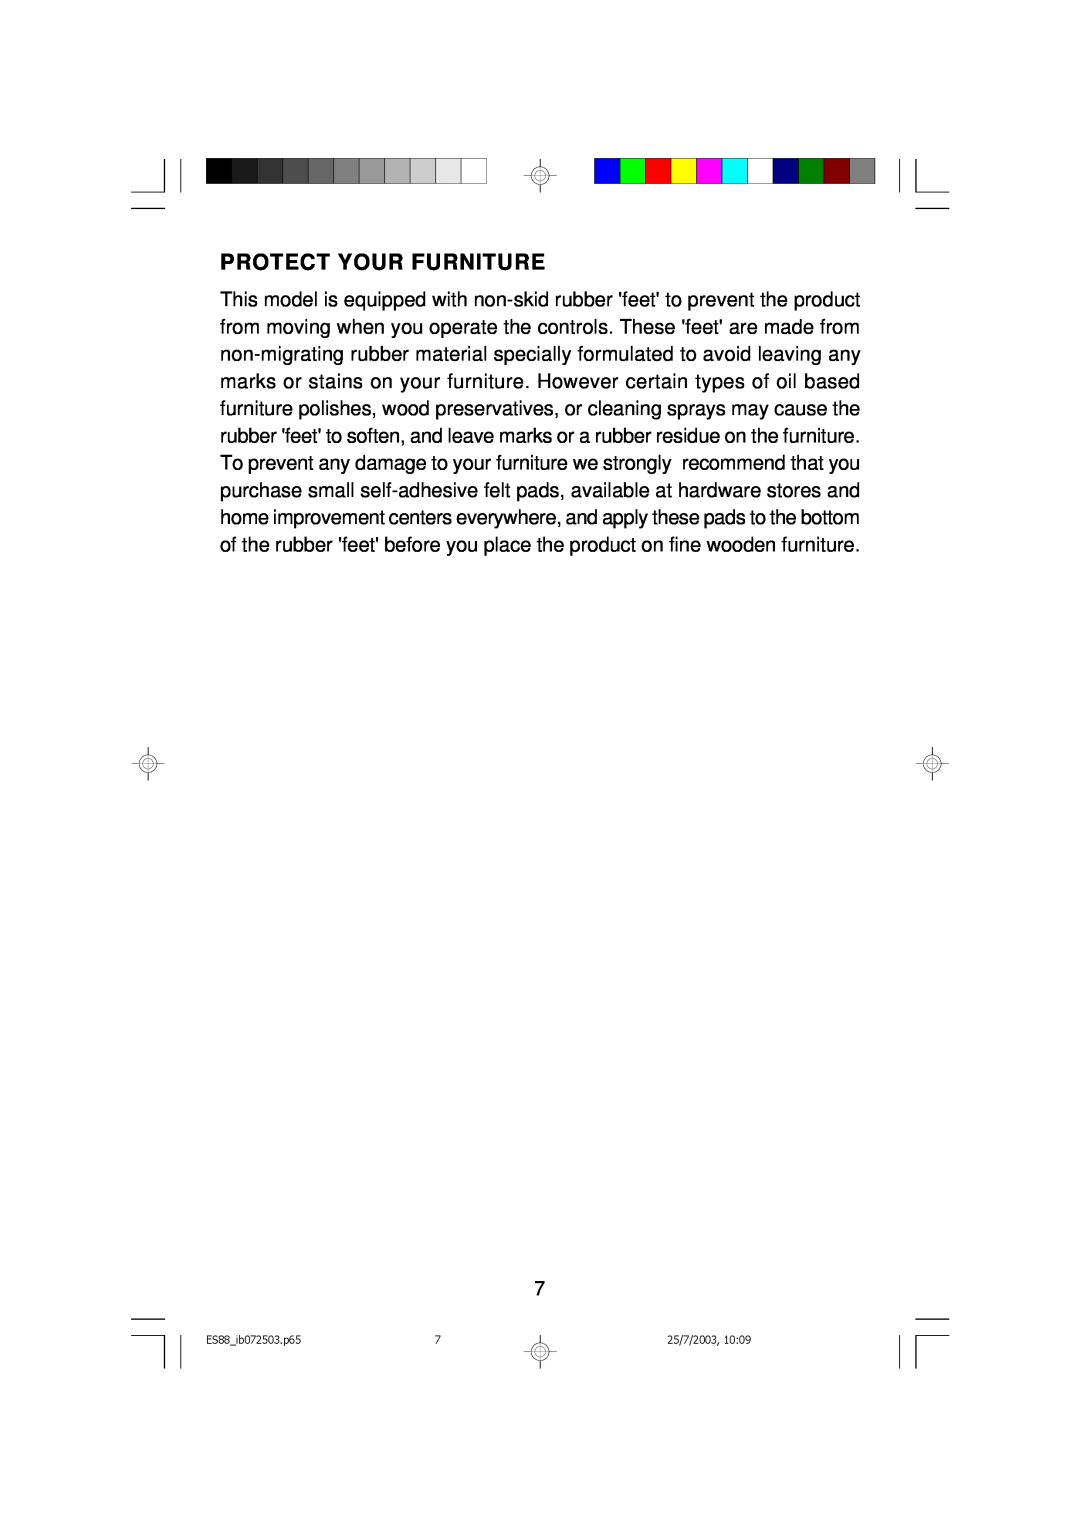 Emerson owner manual Protect Your Furniture, ES88 ib072503.p65, 25/7/2003 